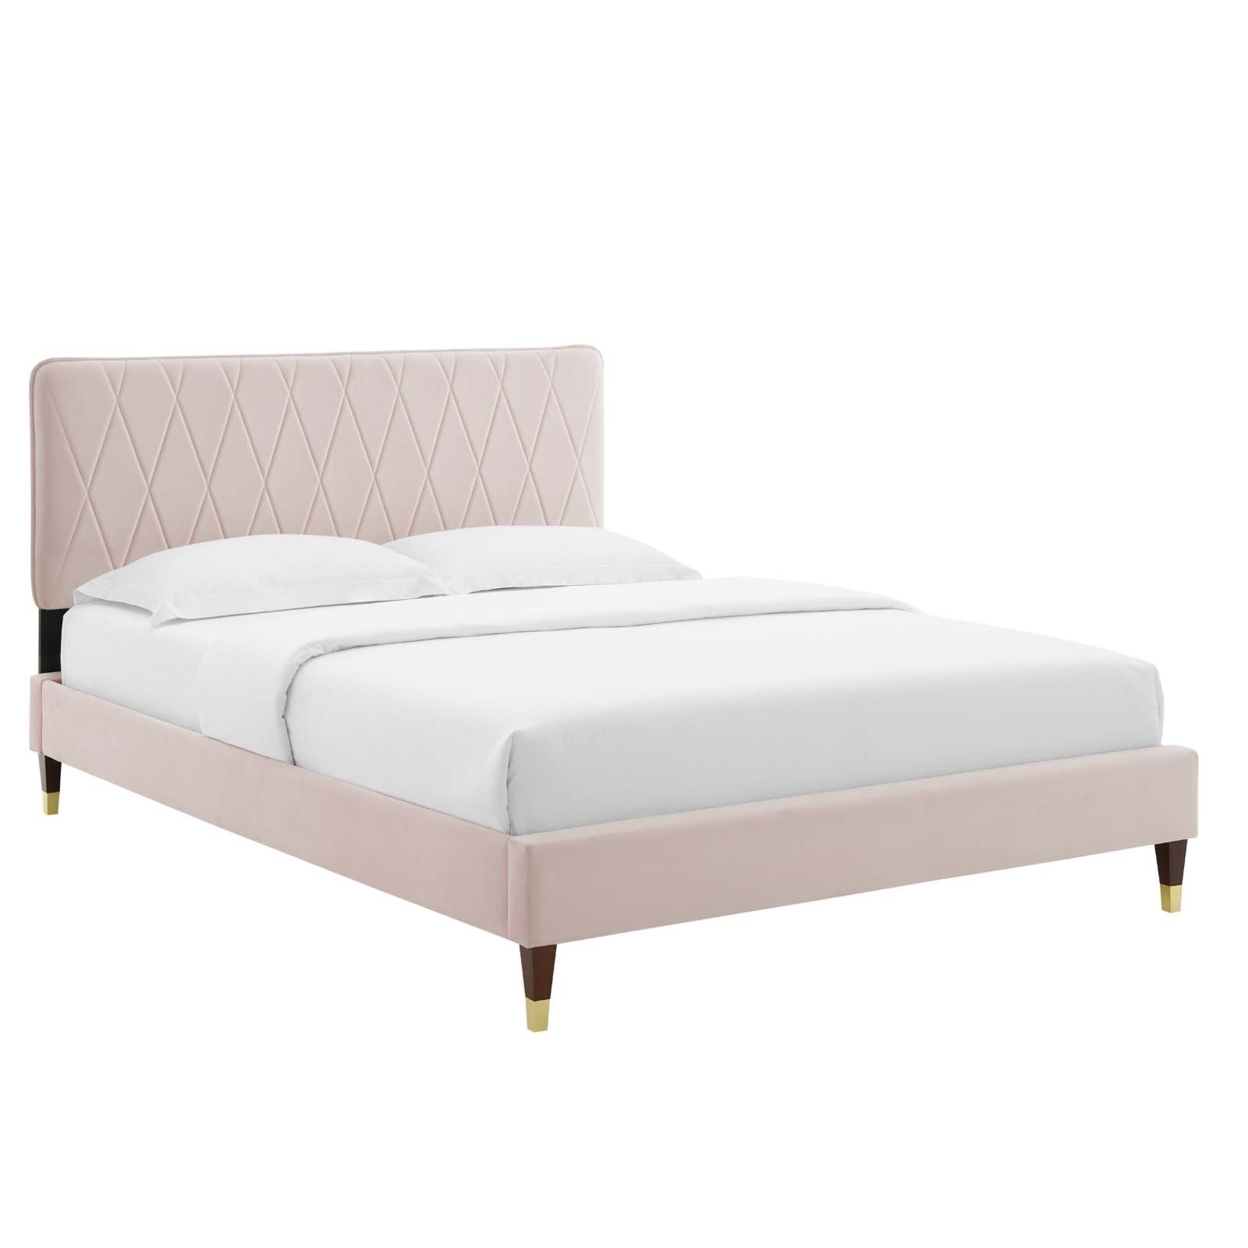 King Bed, Stain Resistant Velvet Fabric, Soft Pink